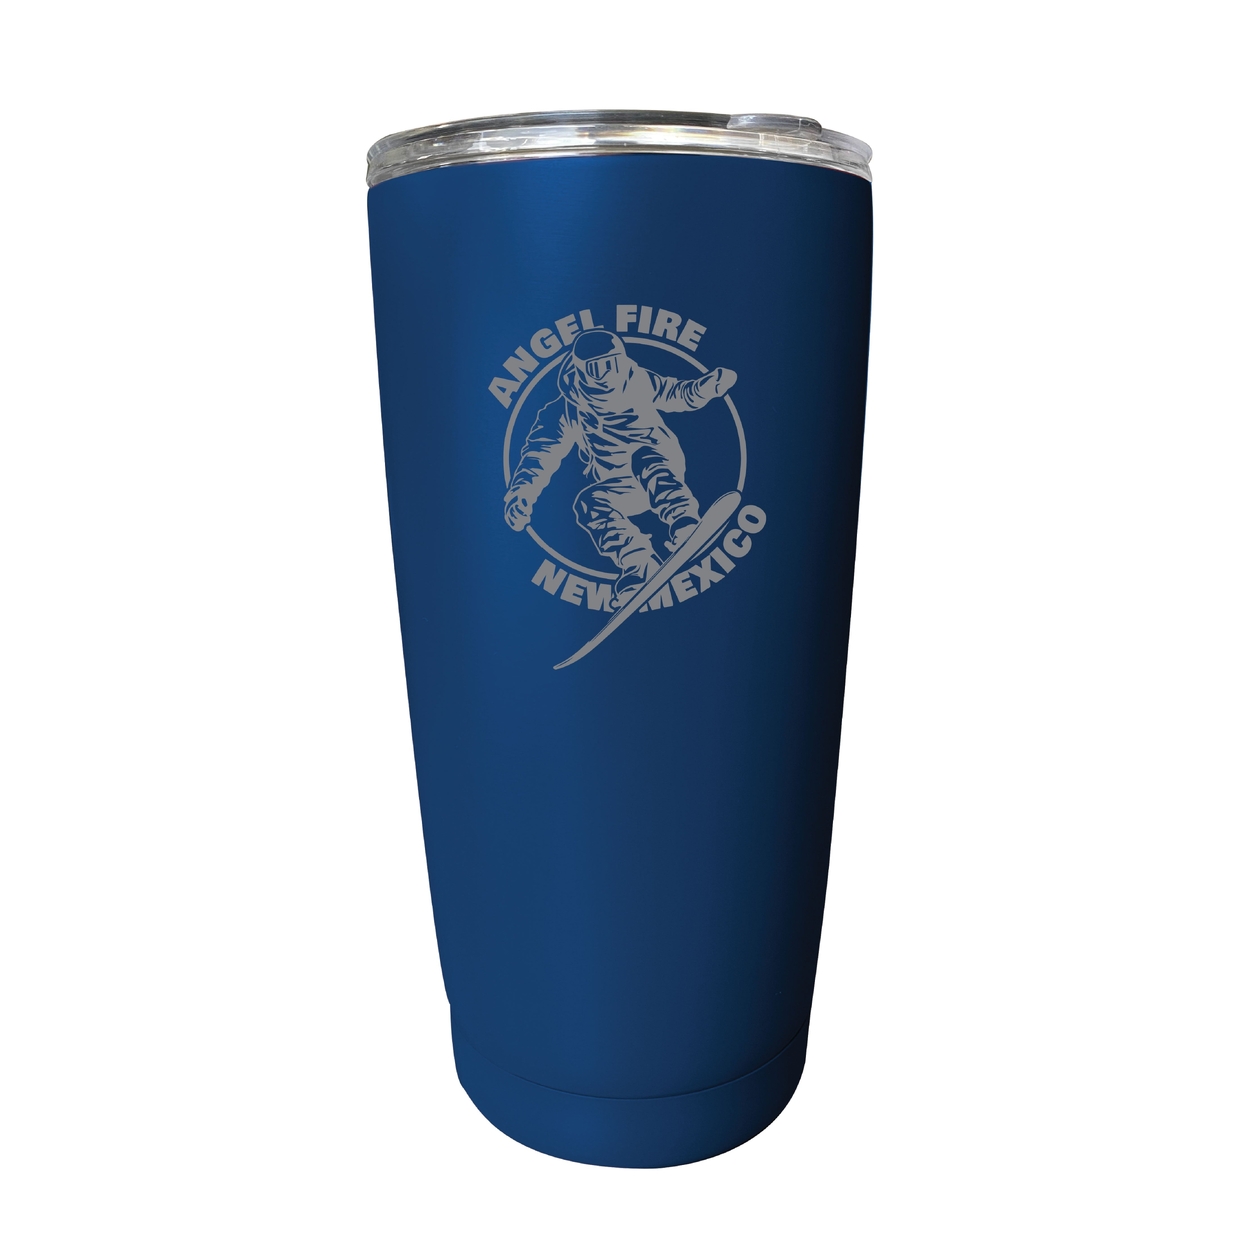 Angel Fire New Mexico Souvenir 16 Oz Engraved Stainless Steel Insulated Tumbler - Navy,,4-Pack